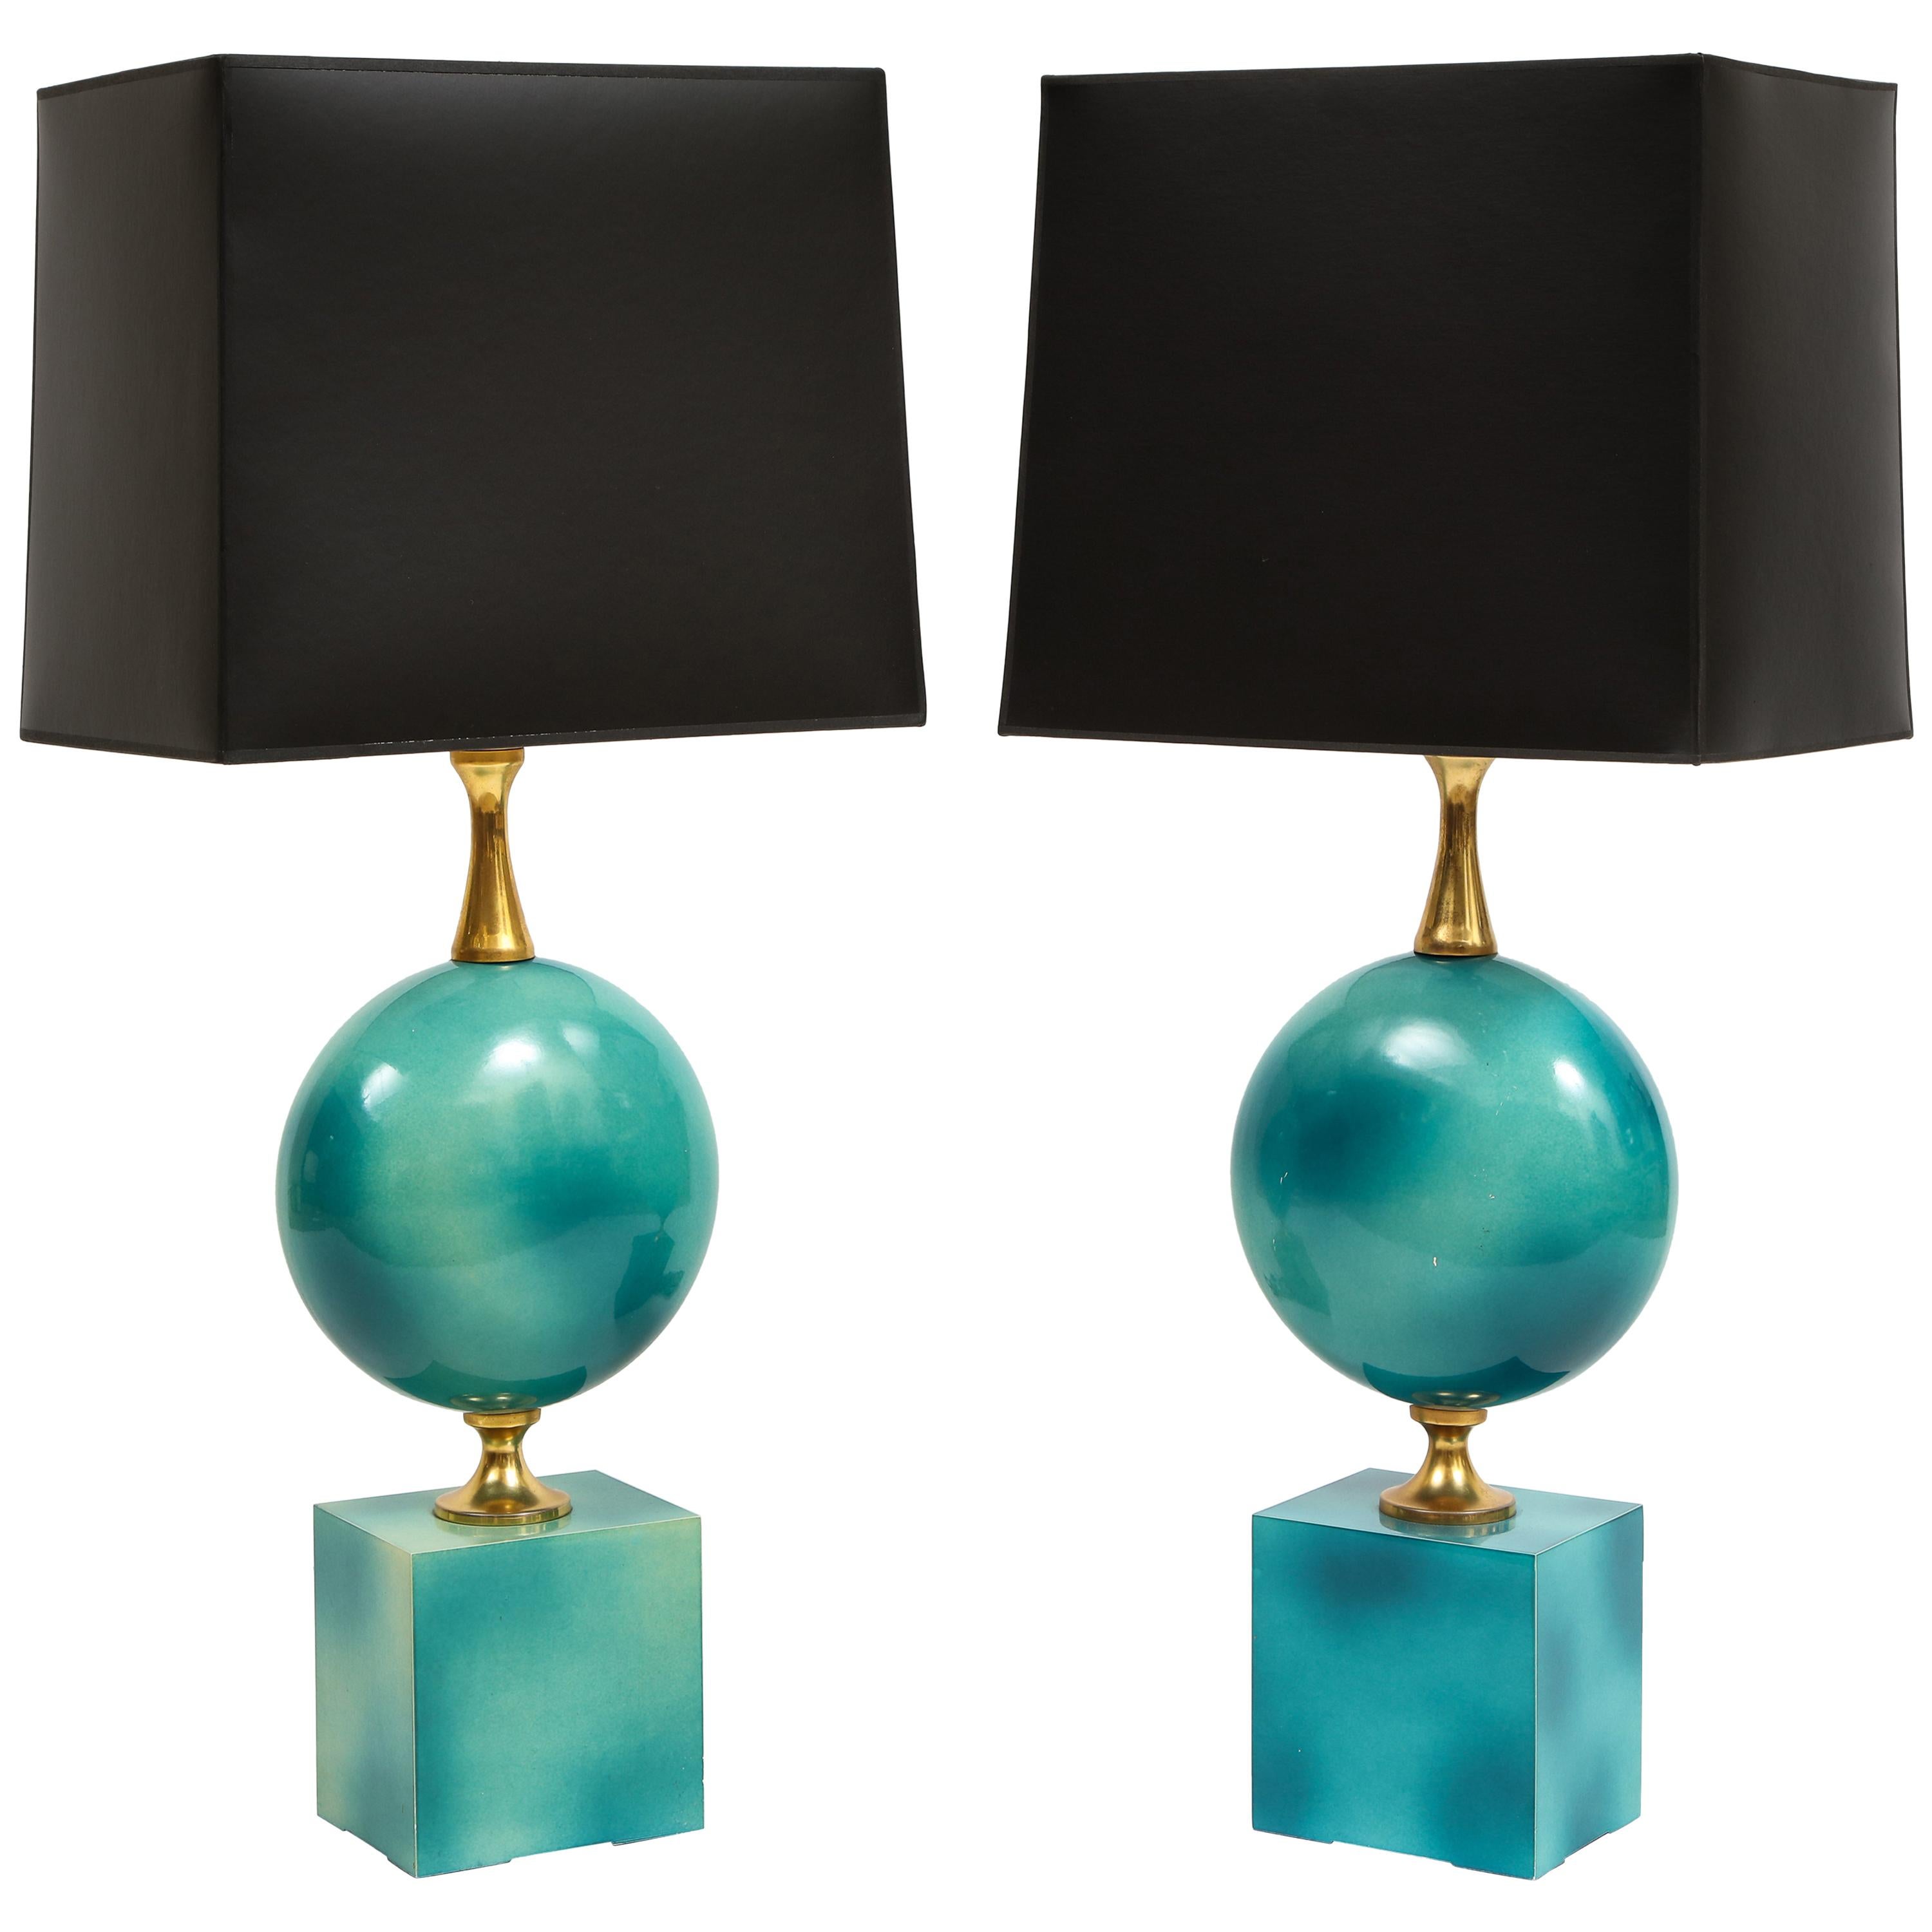 Pair of Enameled Table Lamps by Maison Barbier